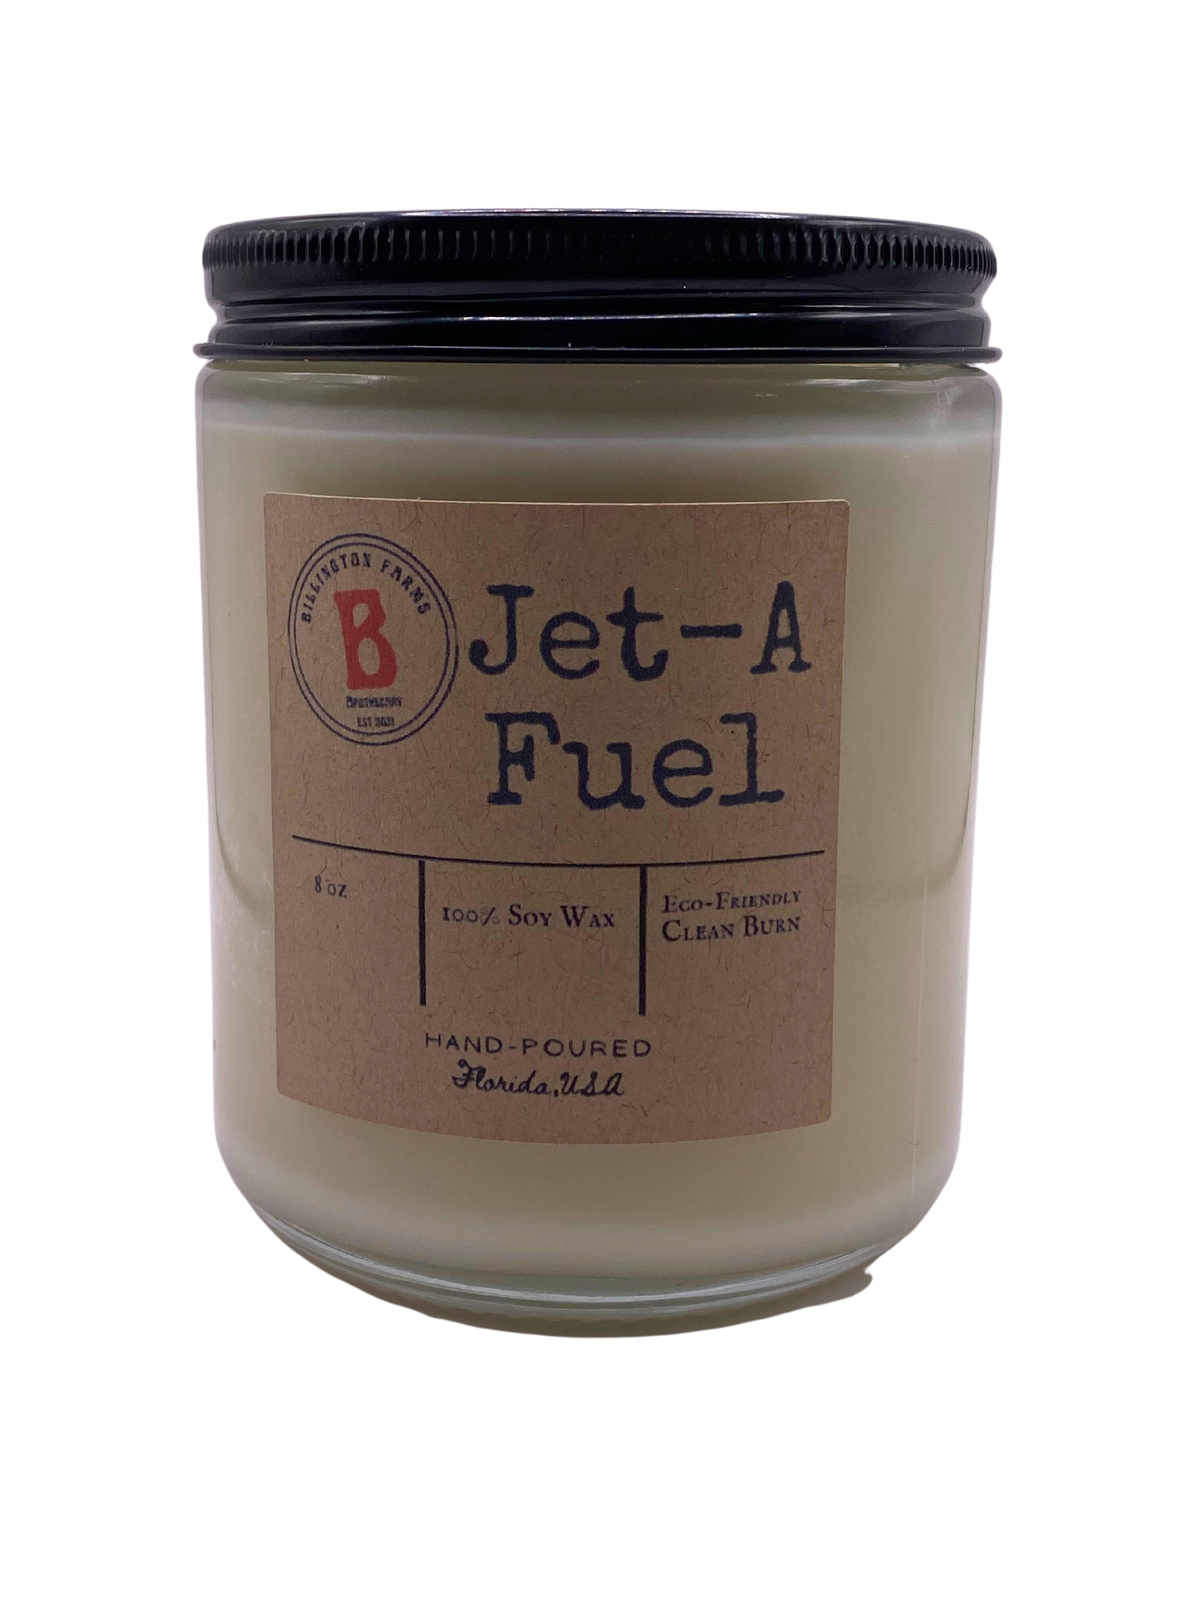 Aircraft Fuel Scented Candles